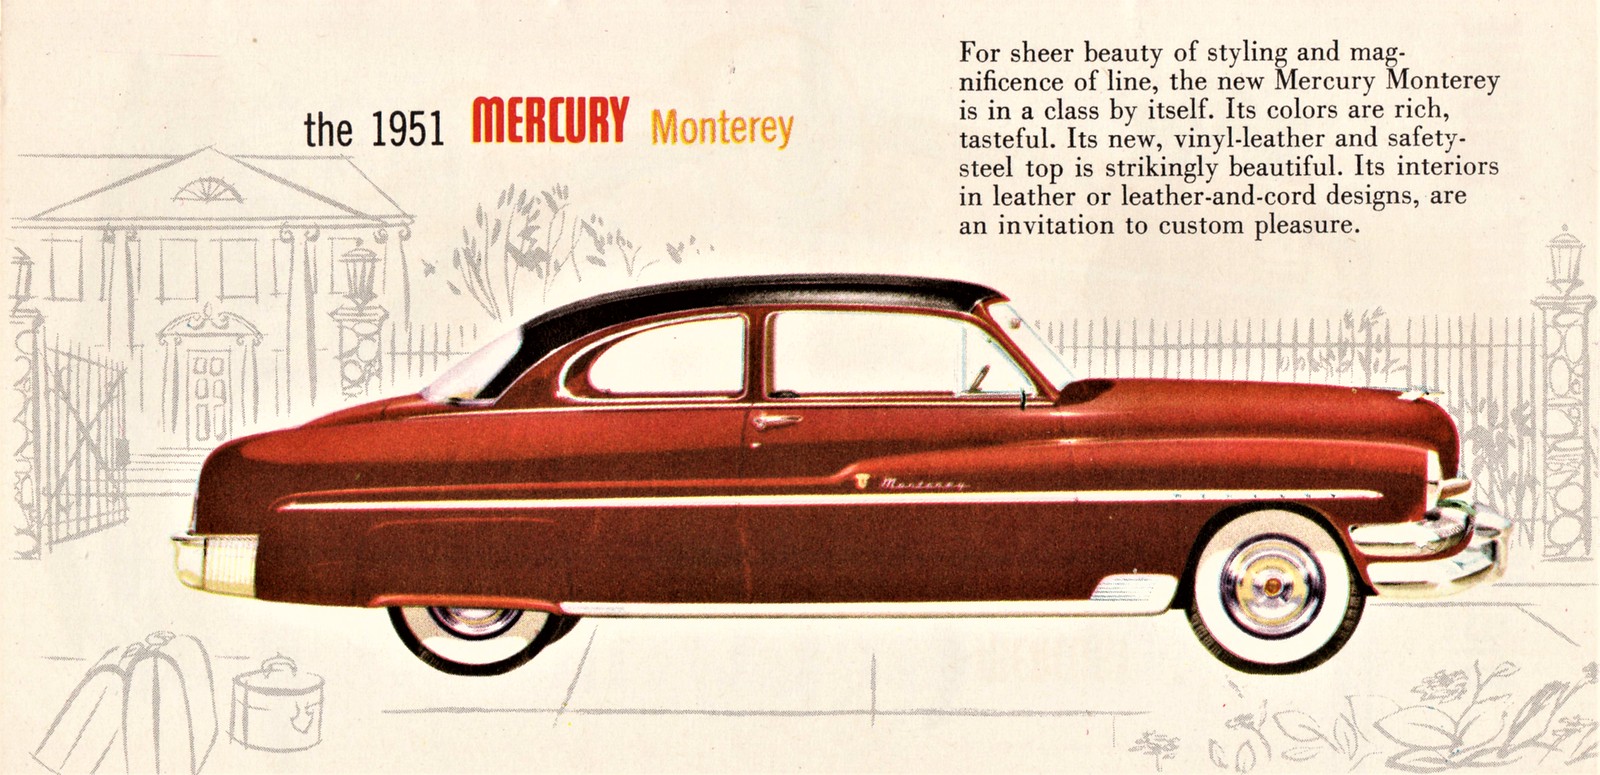 Mercury Monterey 1951. 1973 Mercury Monterey. 1951 Mercury Monarch Coupe _. 1951 Mercury Monterey after.